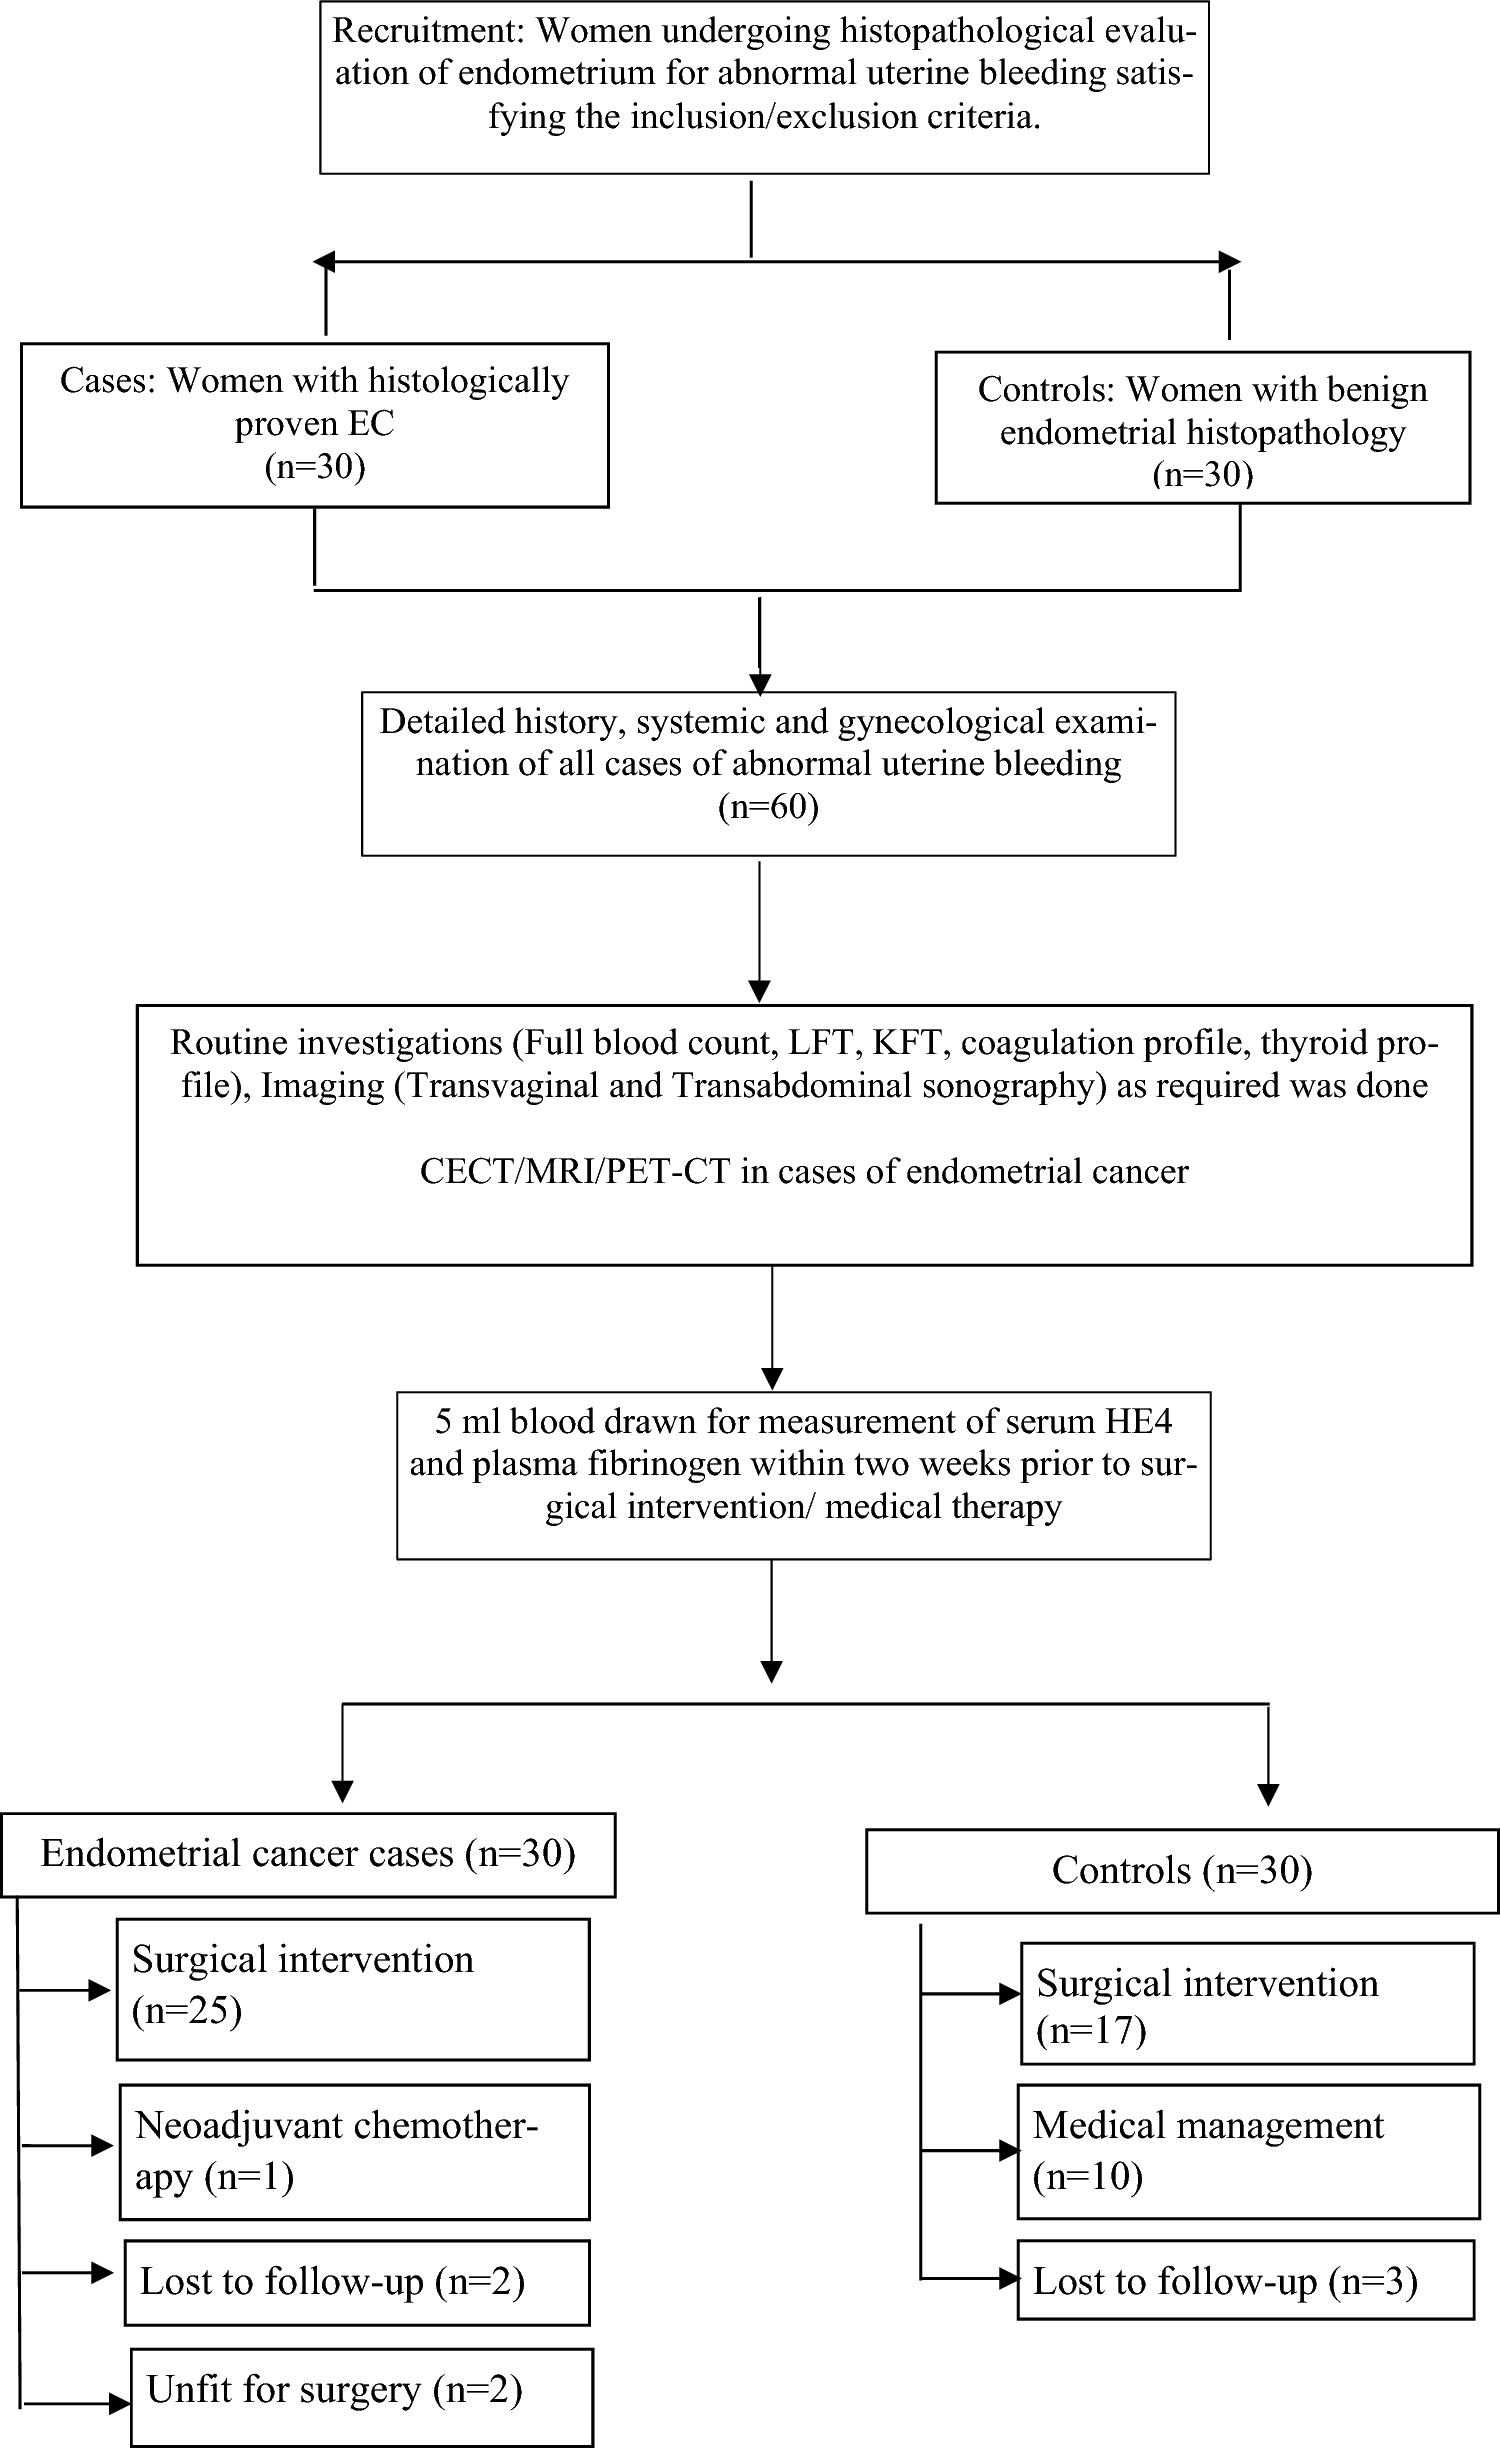 Exploring the Potential of Serum Biomarkers Human Epididymis Protein-4 and Fibrinogen in Endometrial Cancer